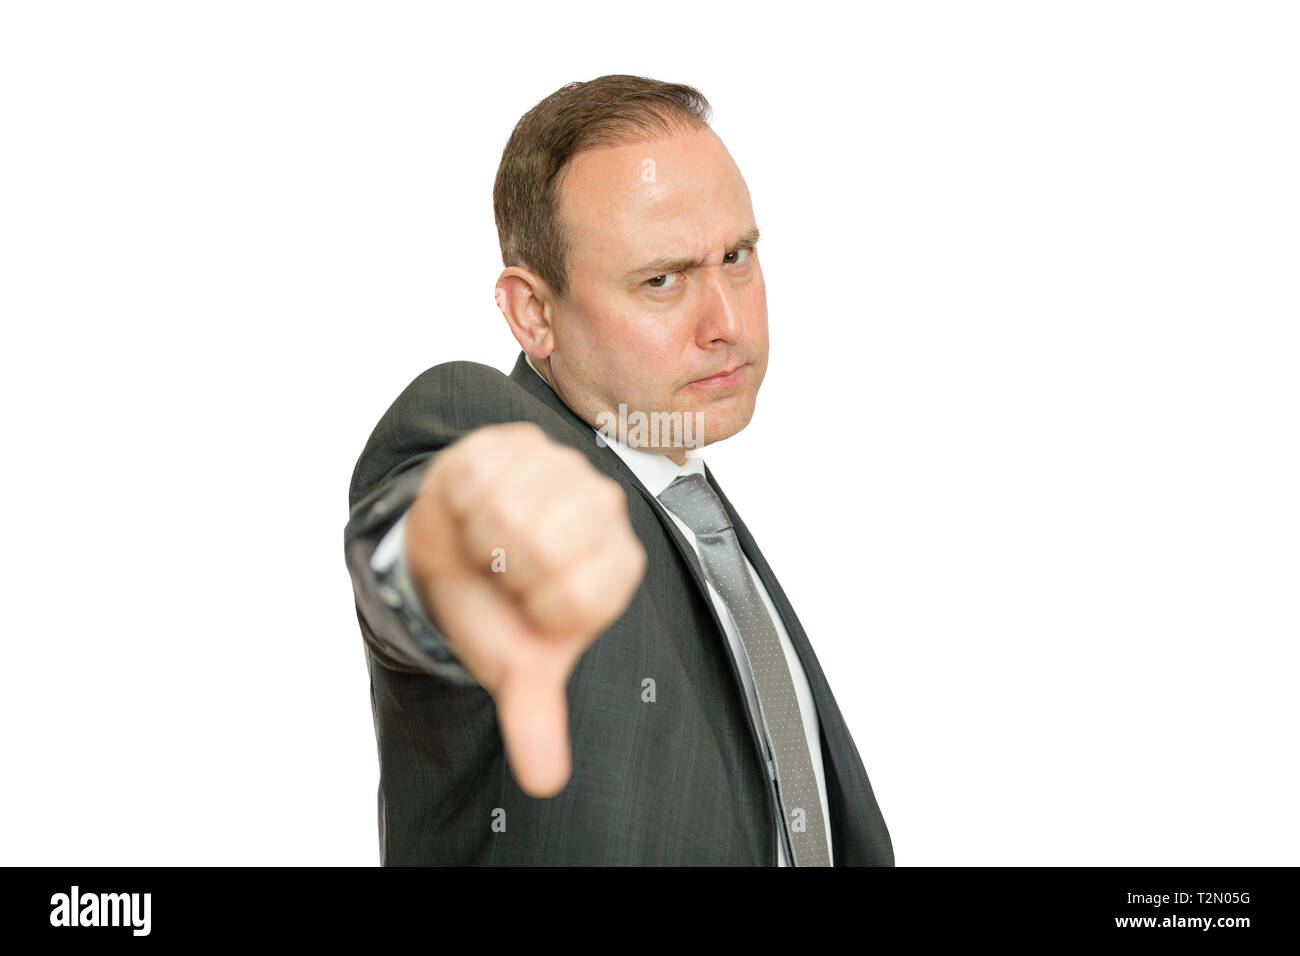 A portrait of a stern, angry business man giving a thumbs down signal on a white background with copy space. Stock Photo